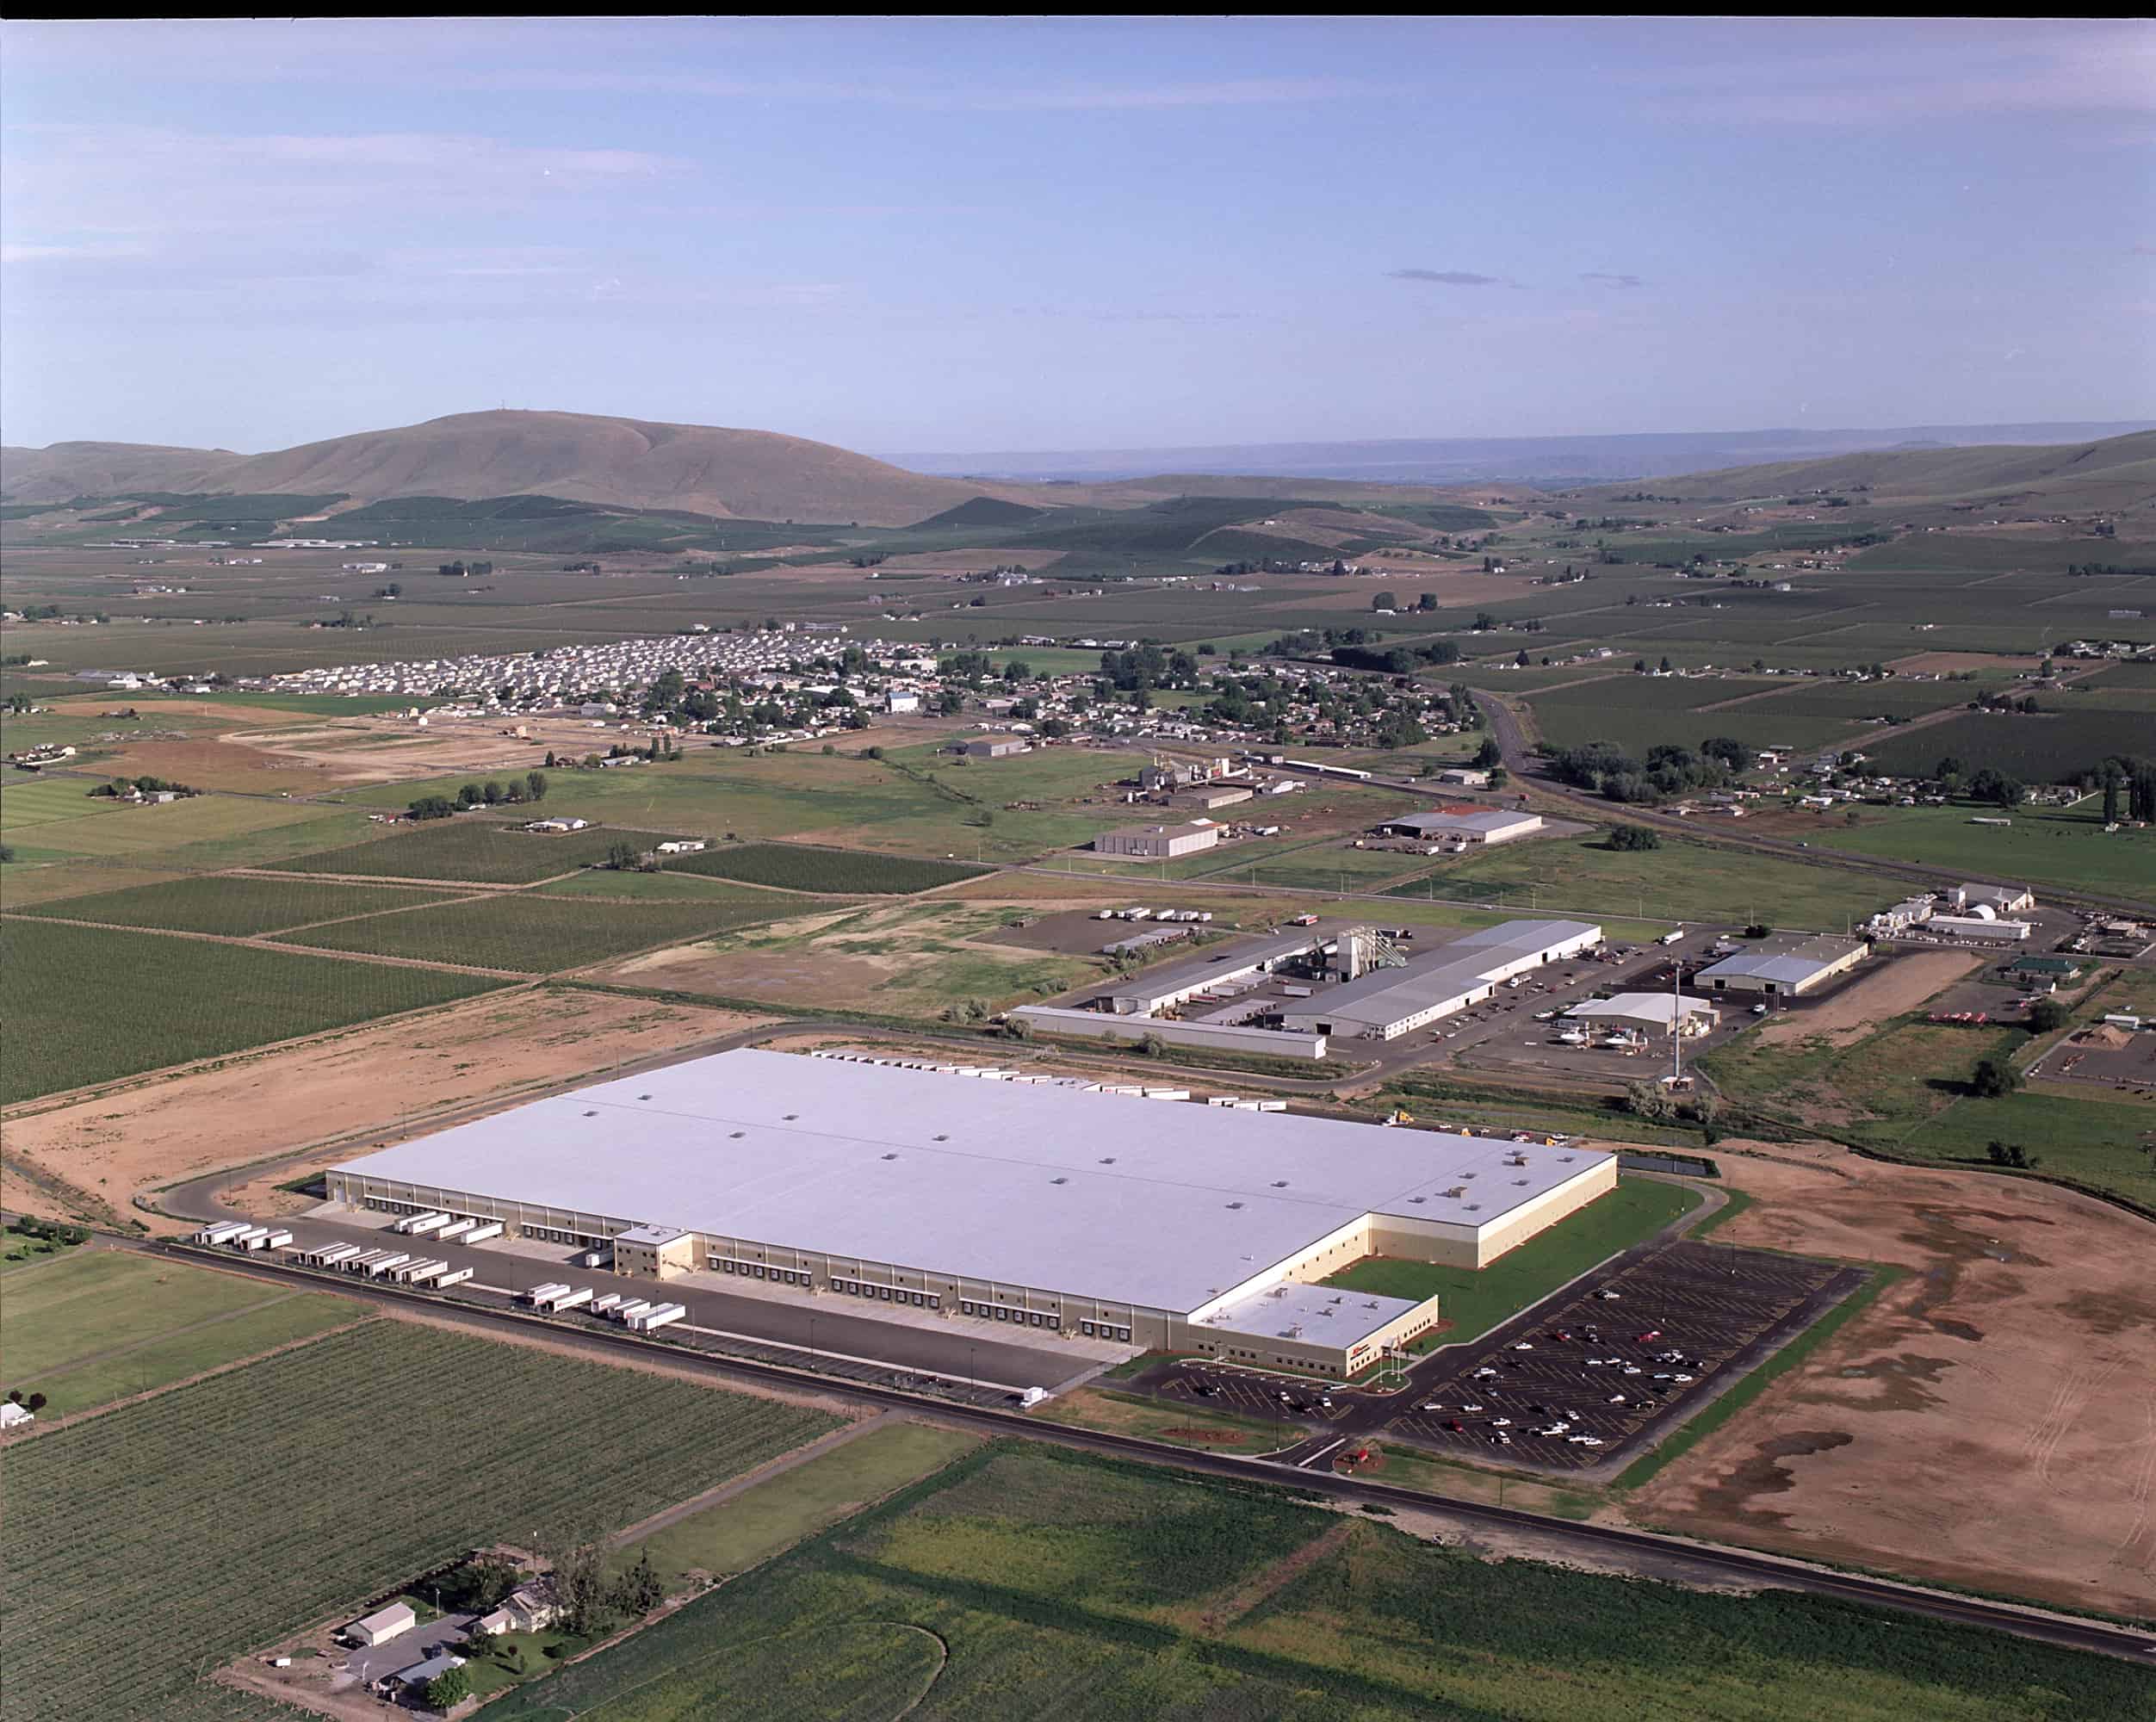 Aerial view of Ace Hardware distribution center